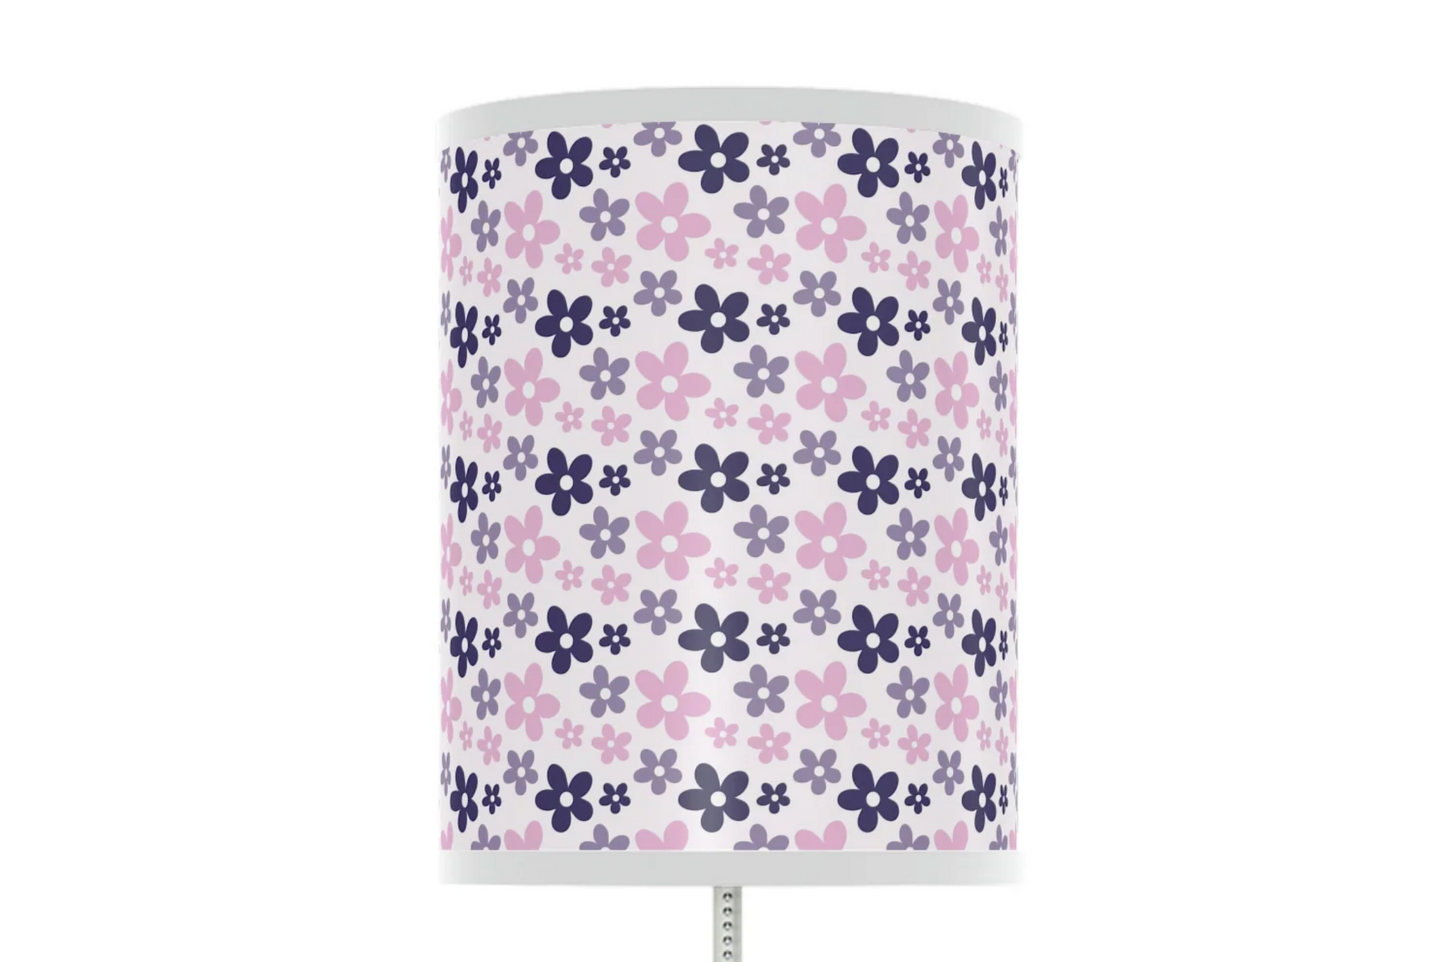 pink and purple floral baby nursery lamp, floral baby lamp